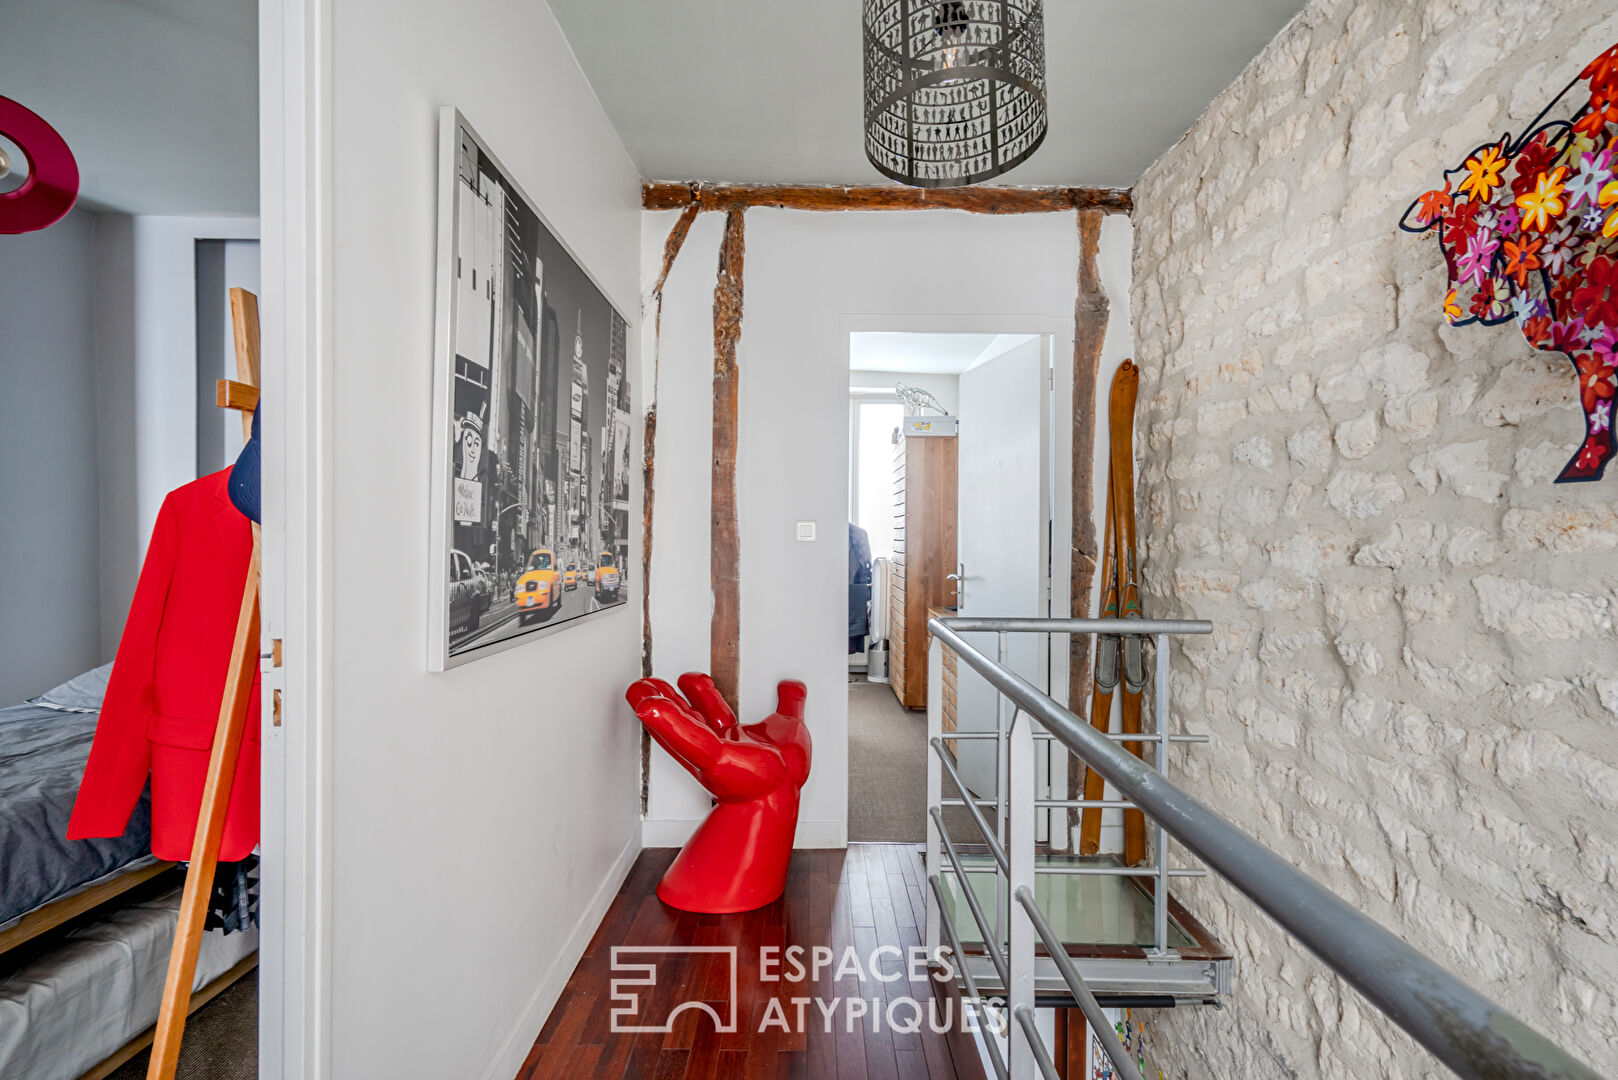 Family triplex with exteriors in Epinettes – Batignolles